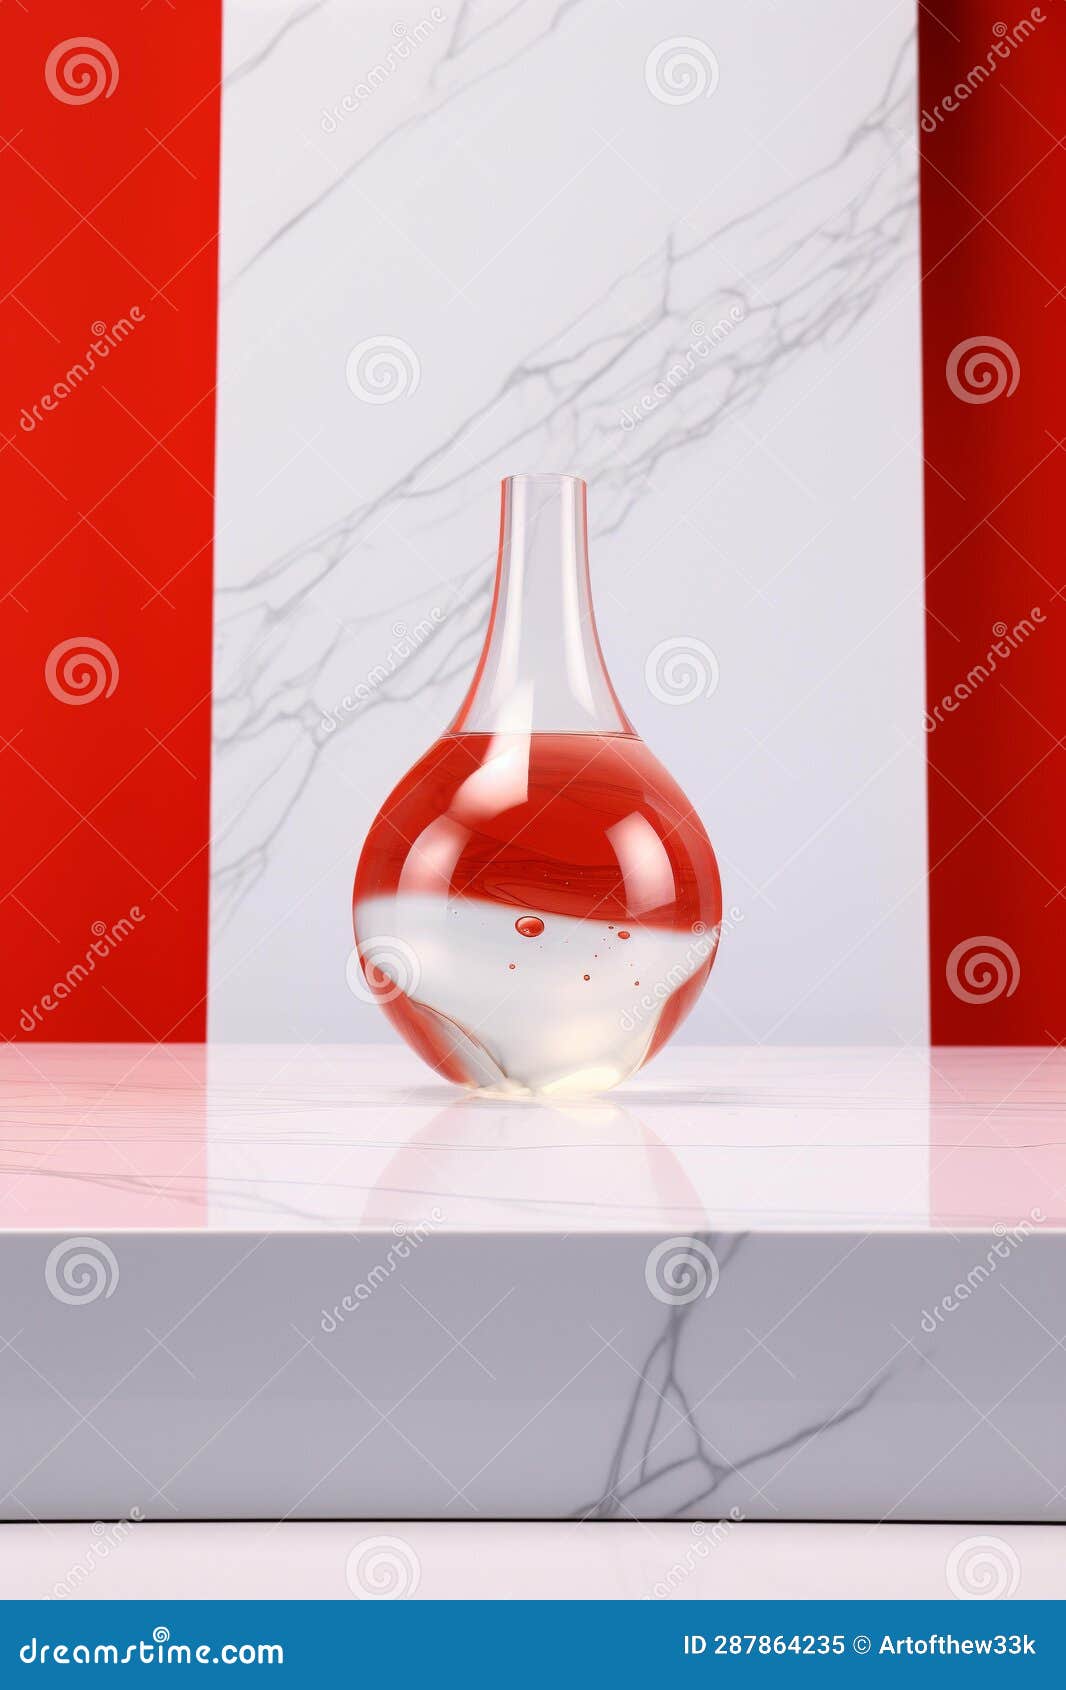 crystal clear jeopardy: suspended red liquid on marble table